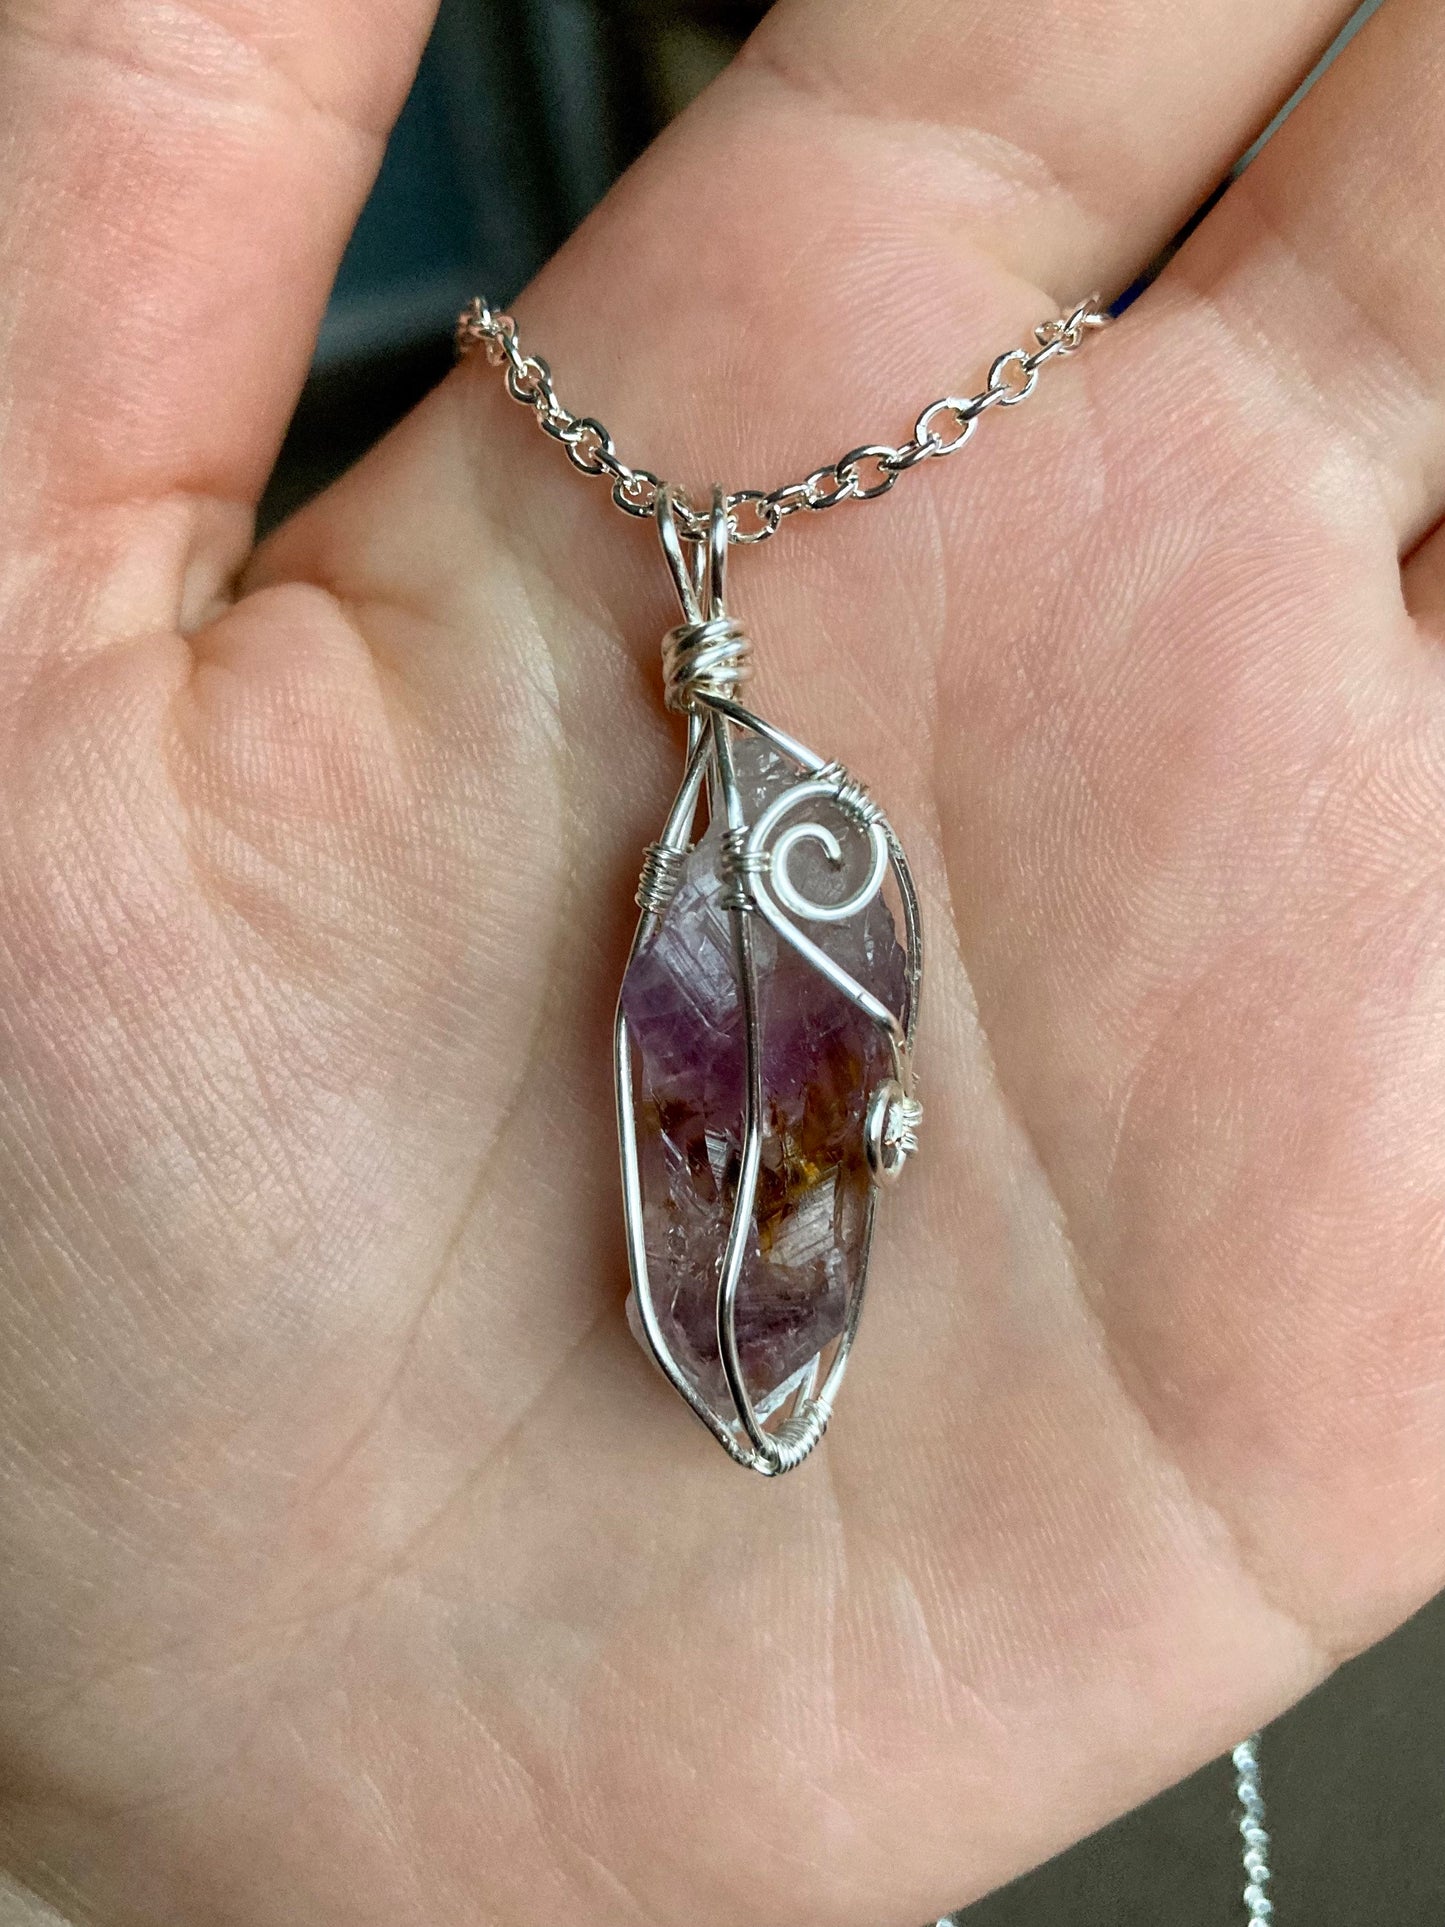 Amethyst pendant handmade necklace wire wrapped natural stone with 18 inch length chain